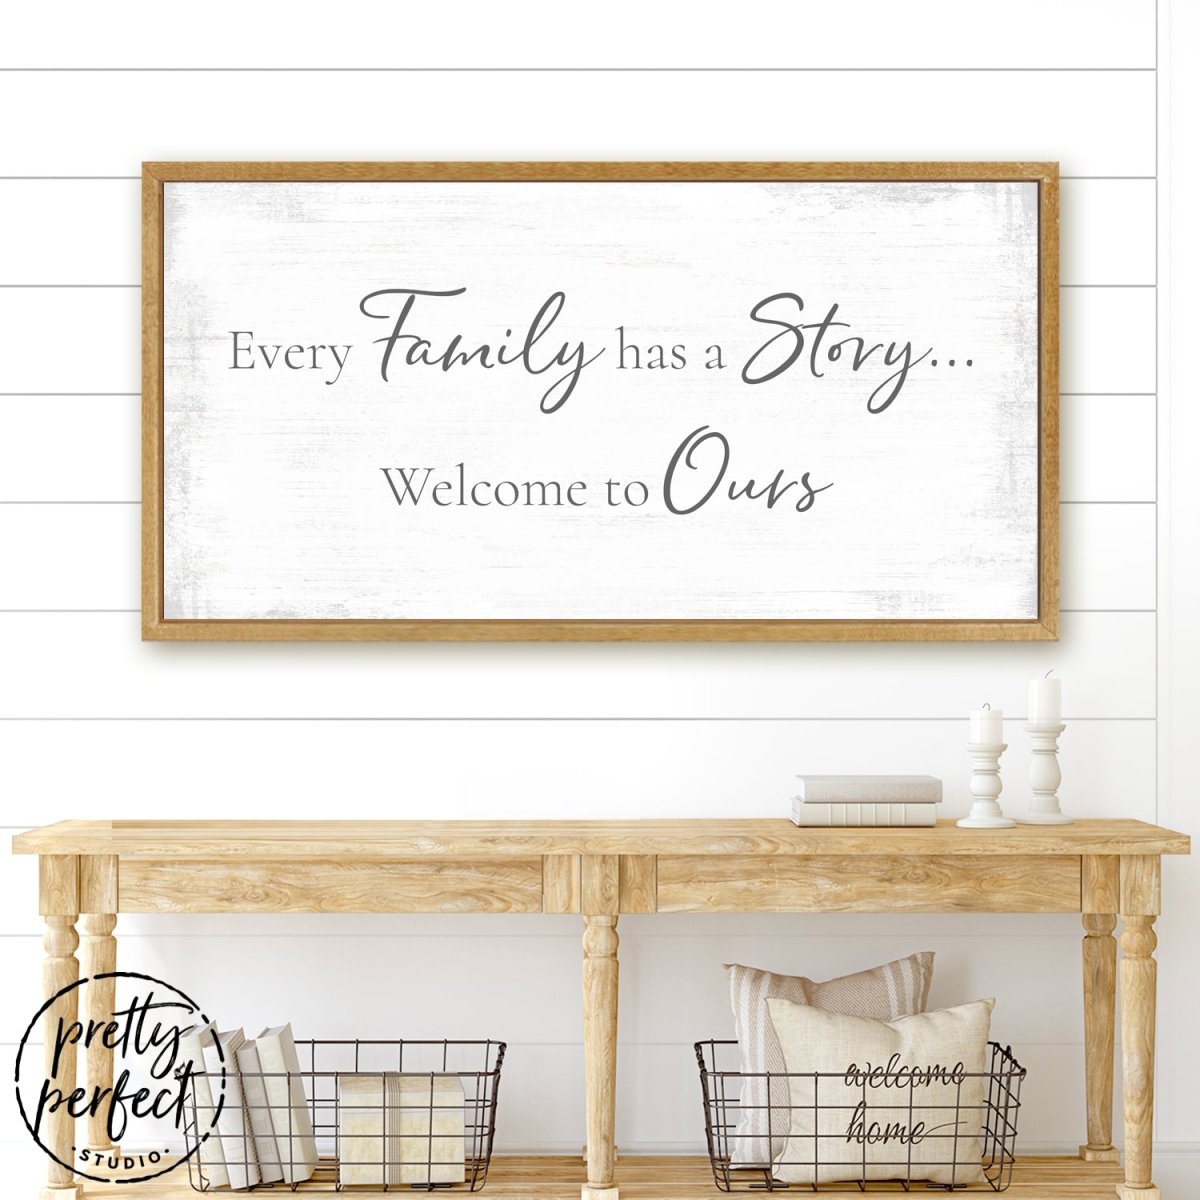 Every Family Has a Story Sign Above Entryway Table - Pretty Perfect Studio